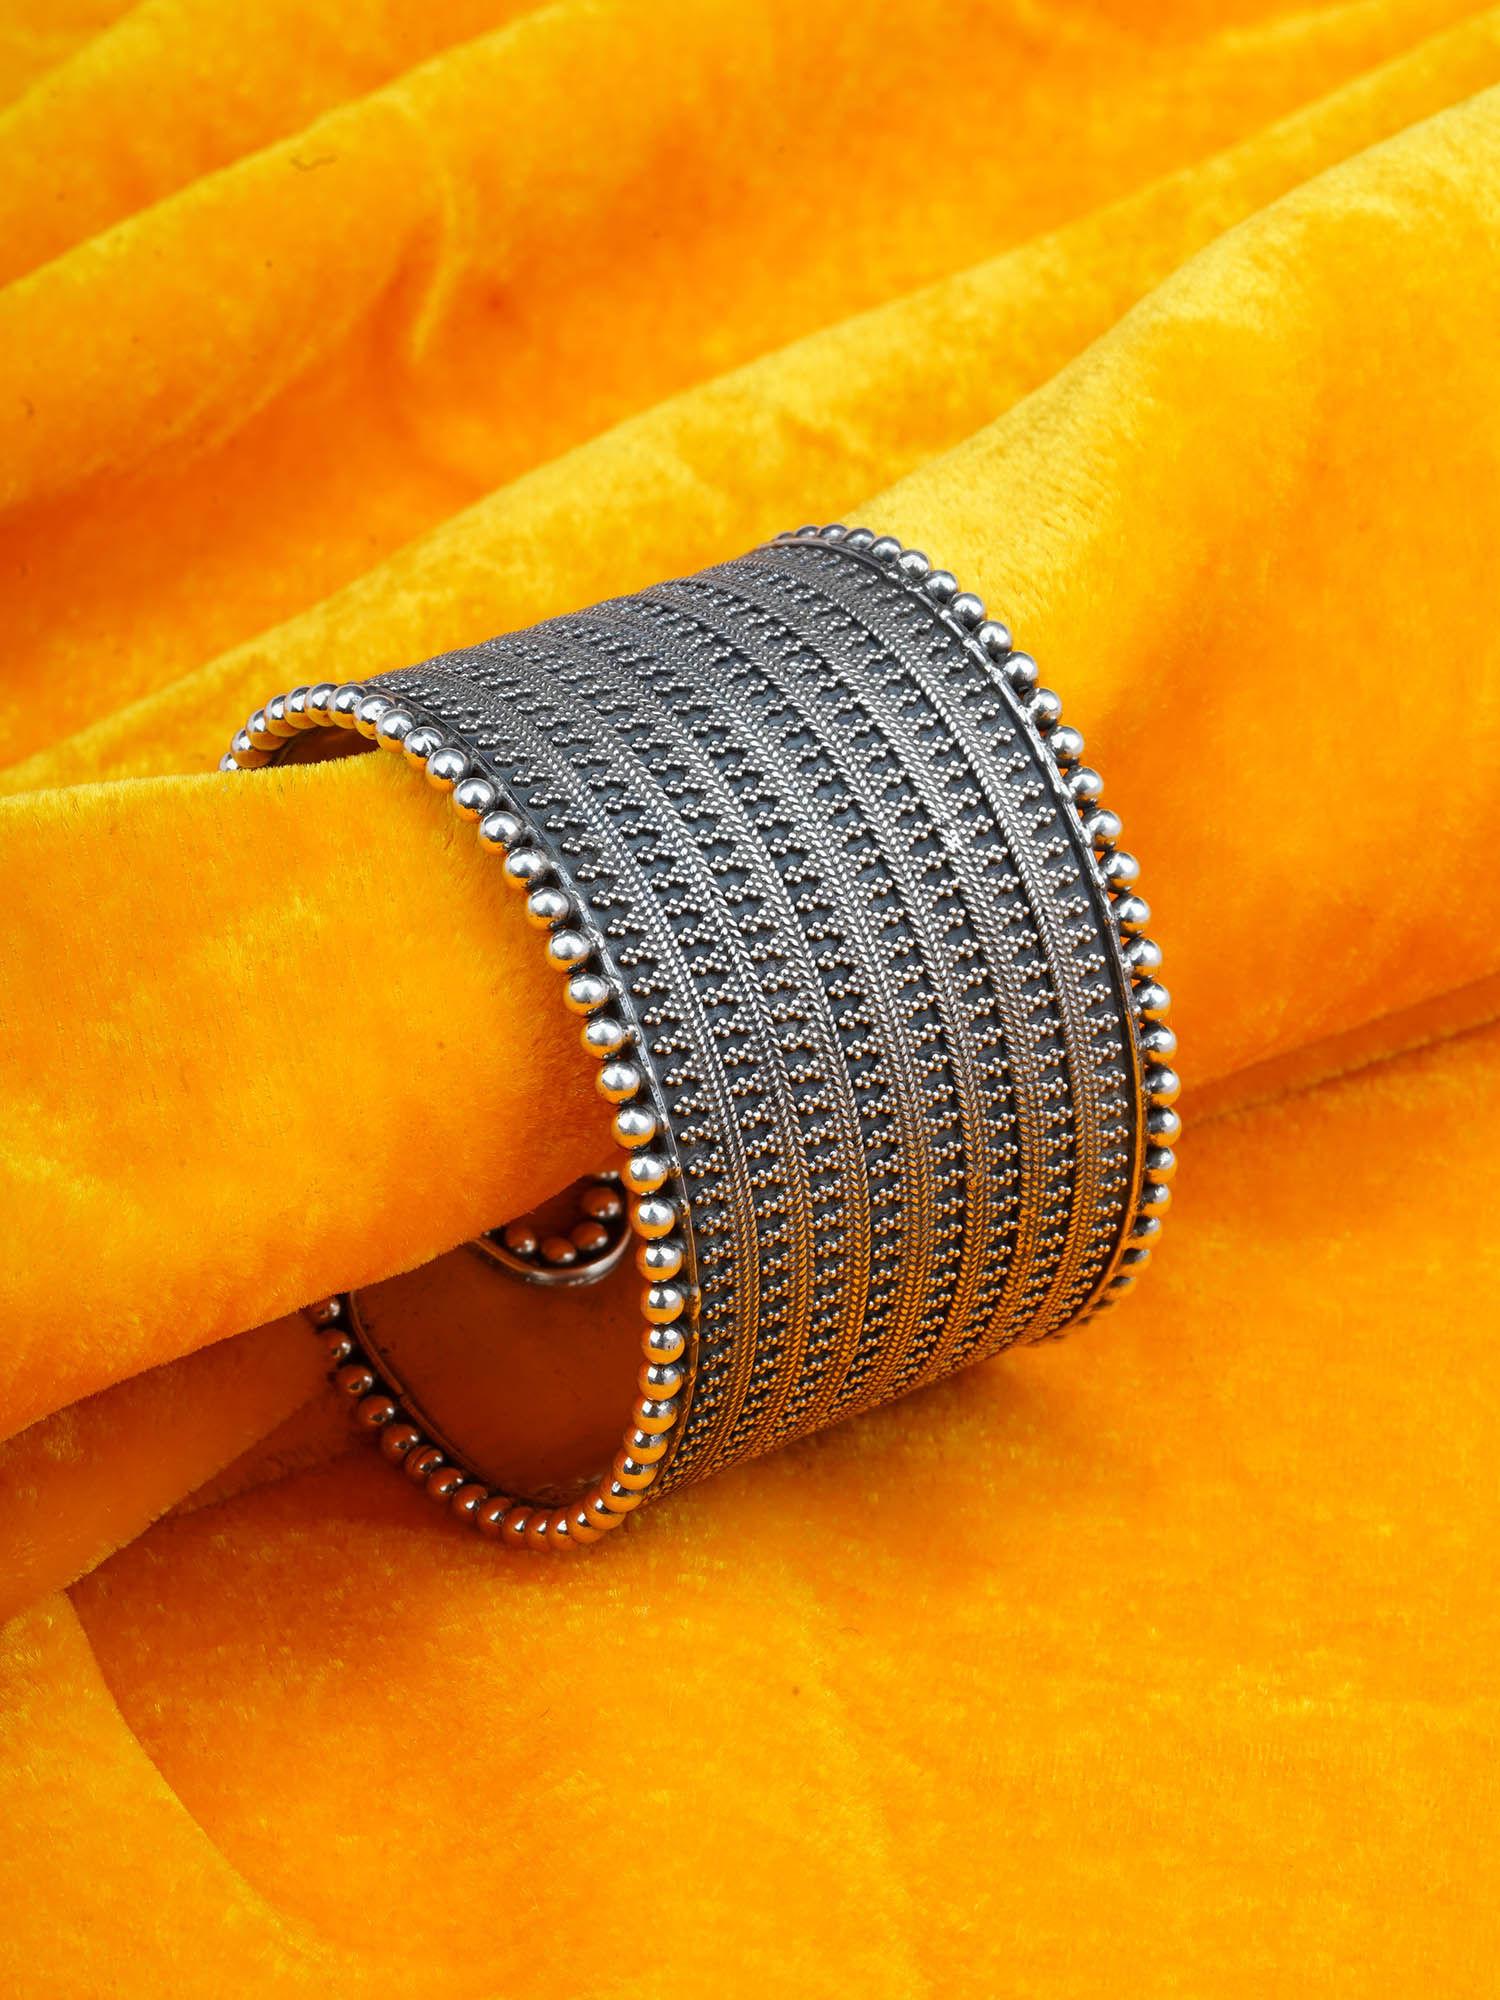 this cuff statement bangle is handcrafted in oxidized silver with beautiful beads